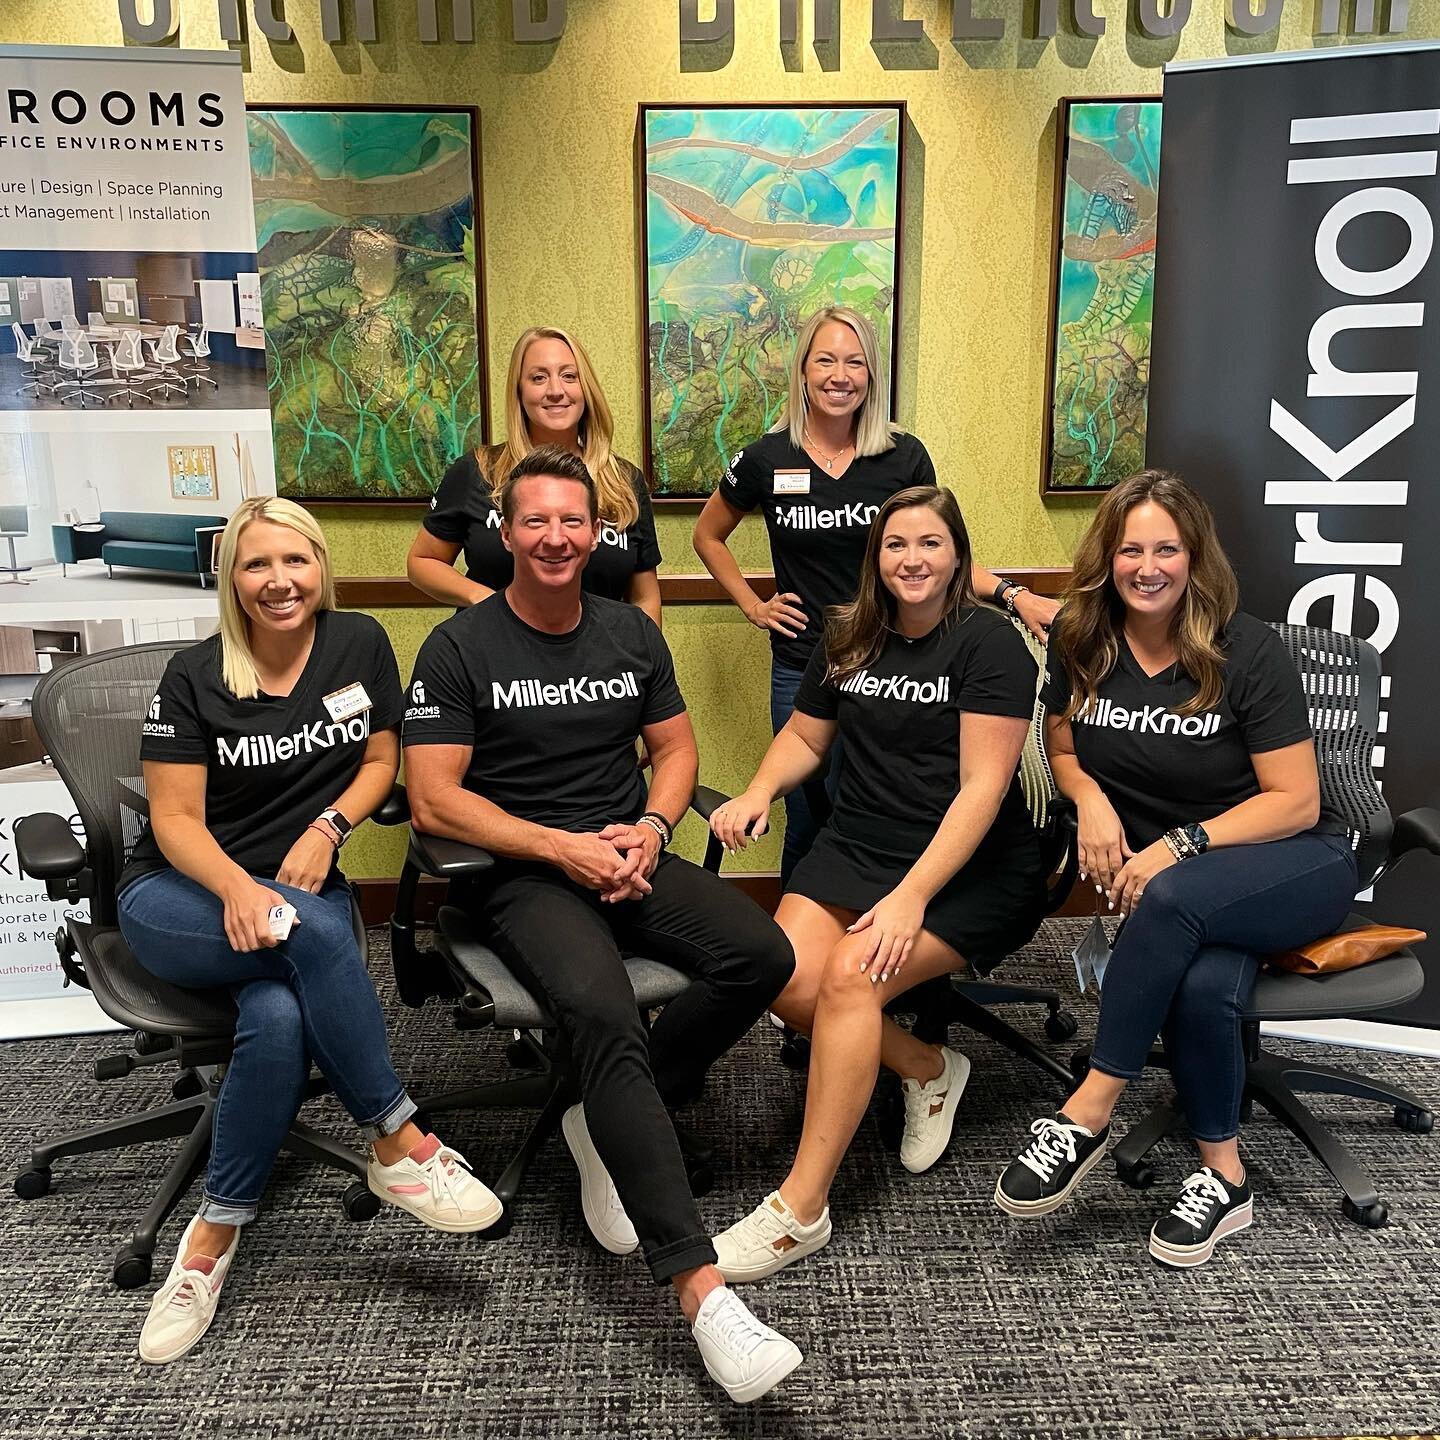 We had fun being part of the 2022 Economic Outlook hosted by the Springfield Chamber of Commerce today! We brought 4 of the most popular ergonomic office chairs from @hermanmiller and @knoll for event attendees to try out. 

Since 1982, Grooms Office